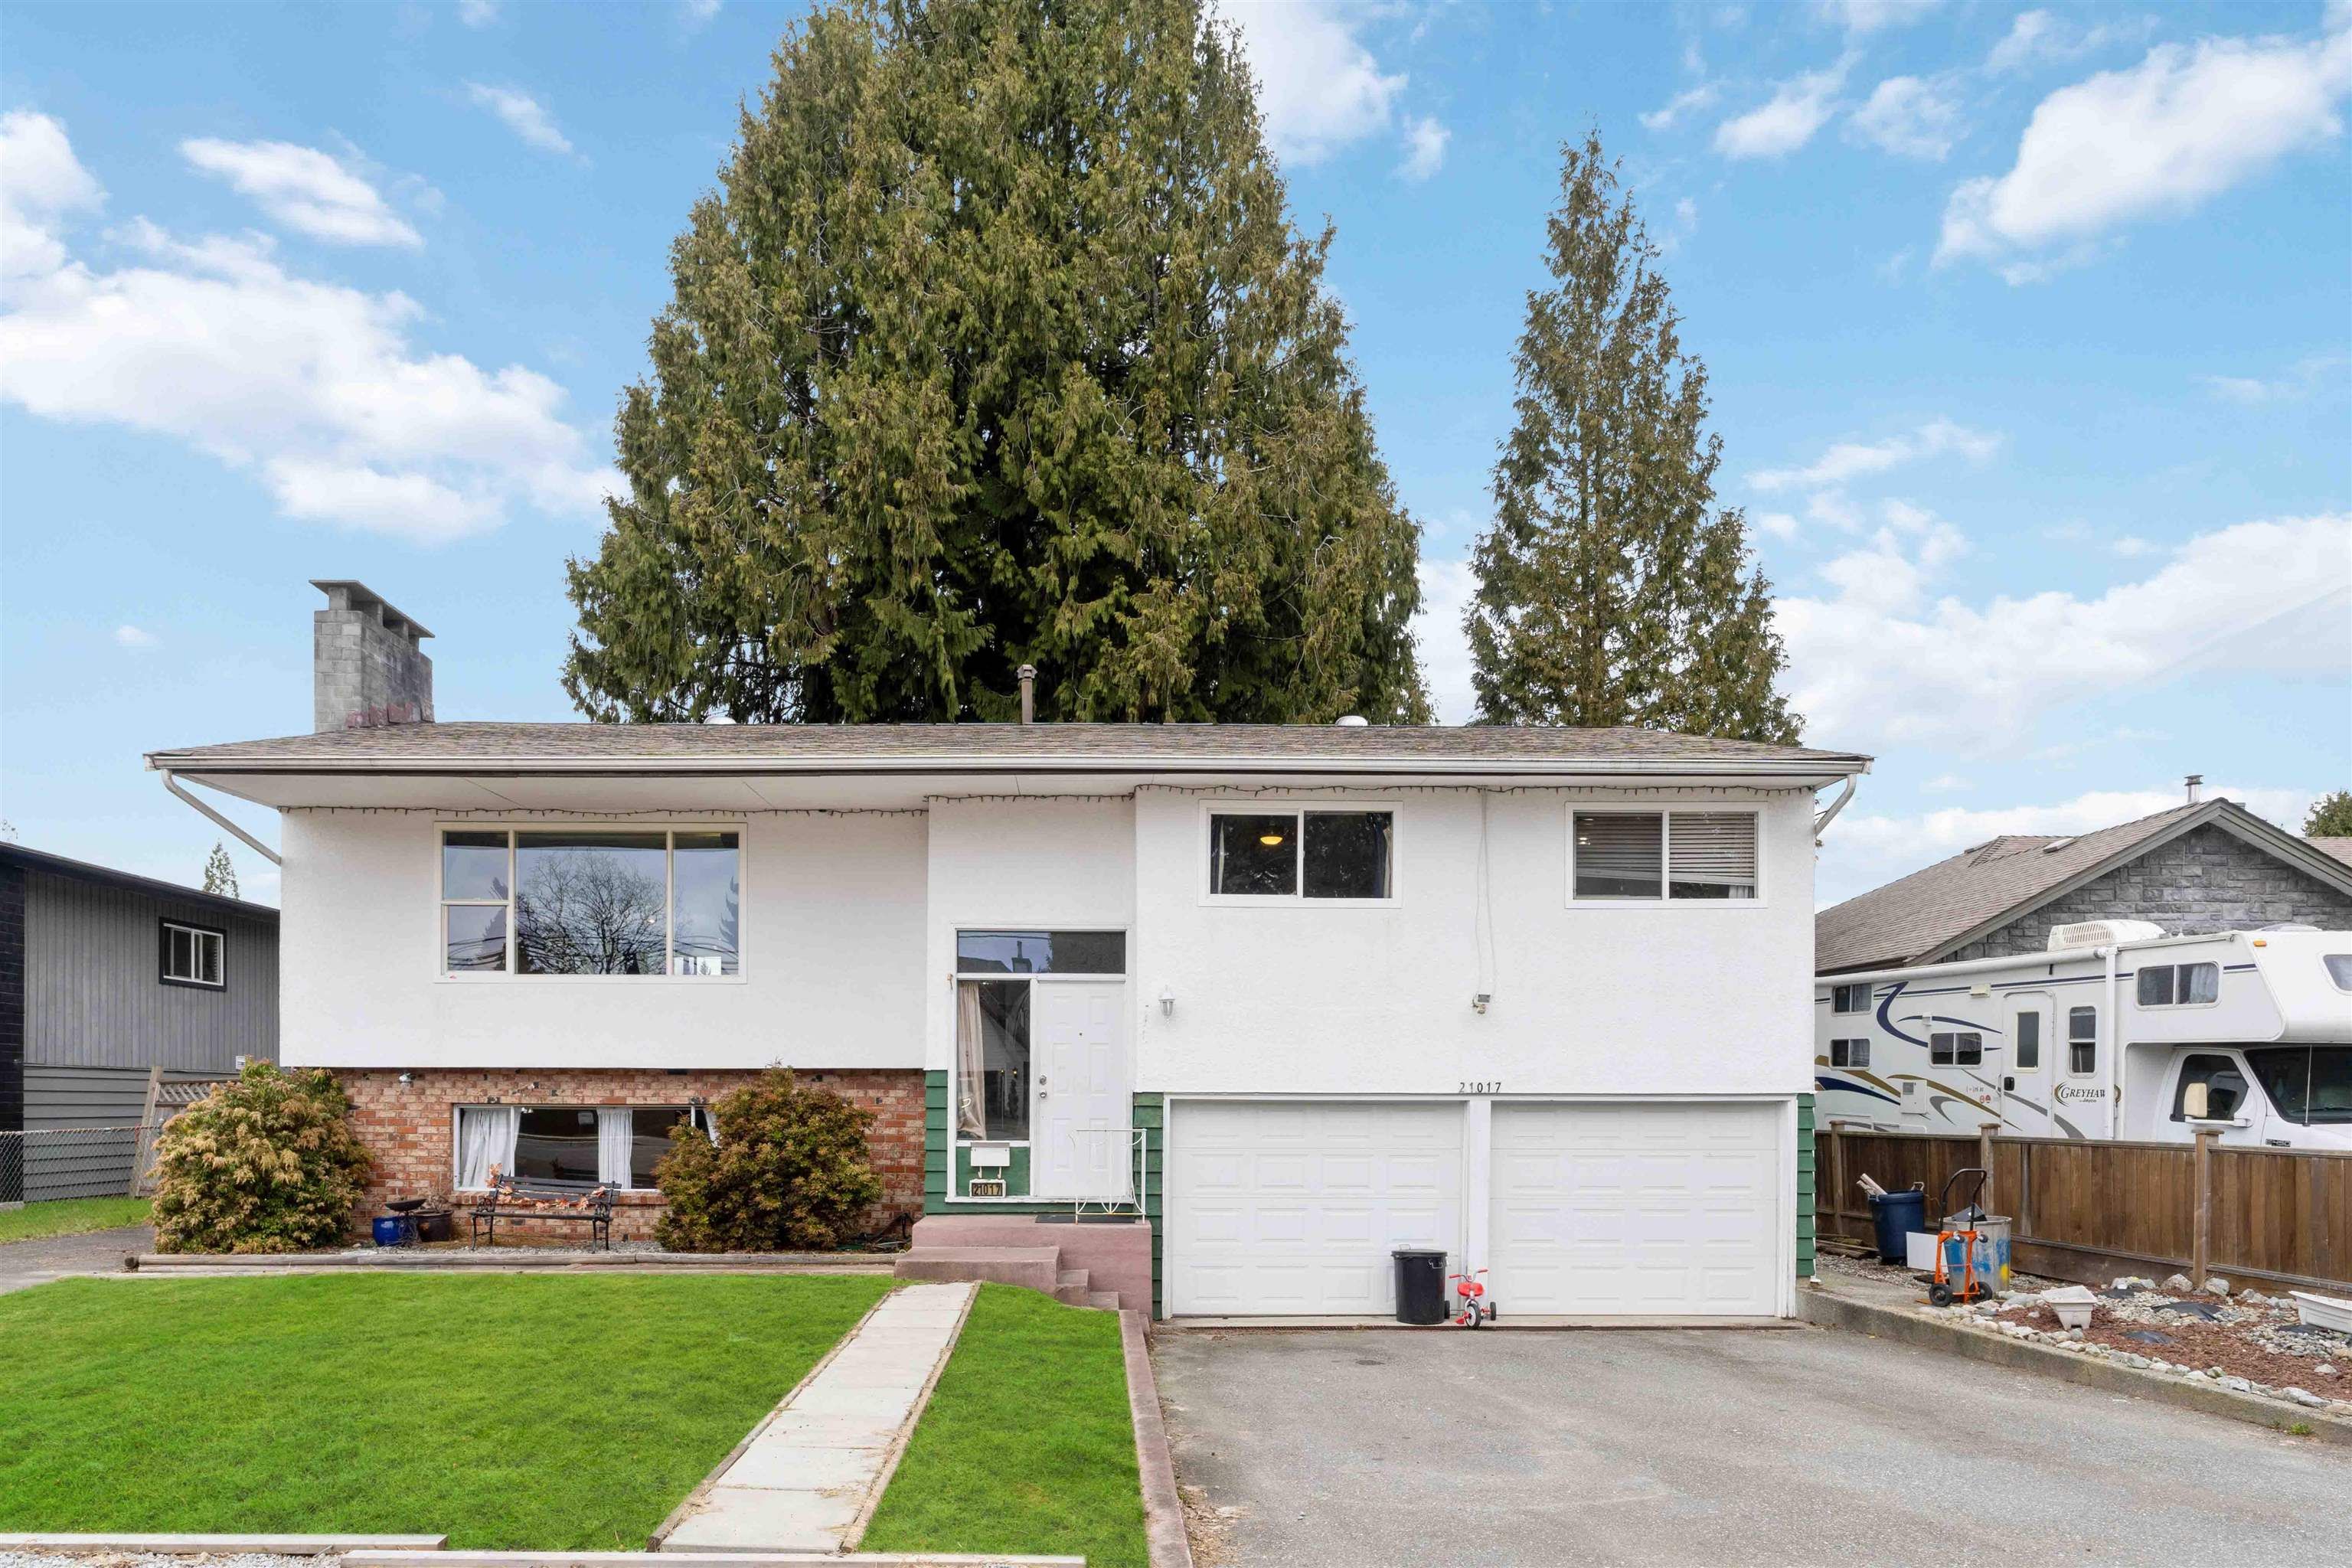 I have sold a property at 21017 RIVER RD in Maple Ridge
